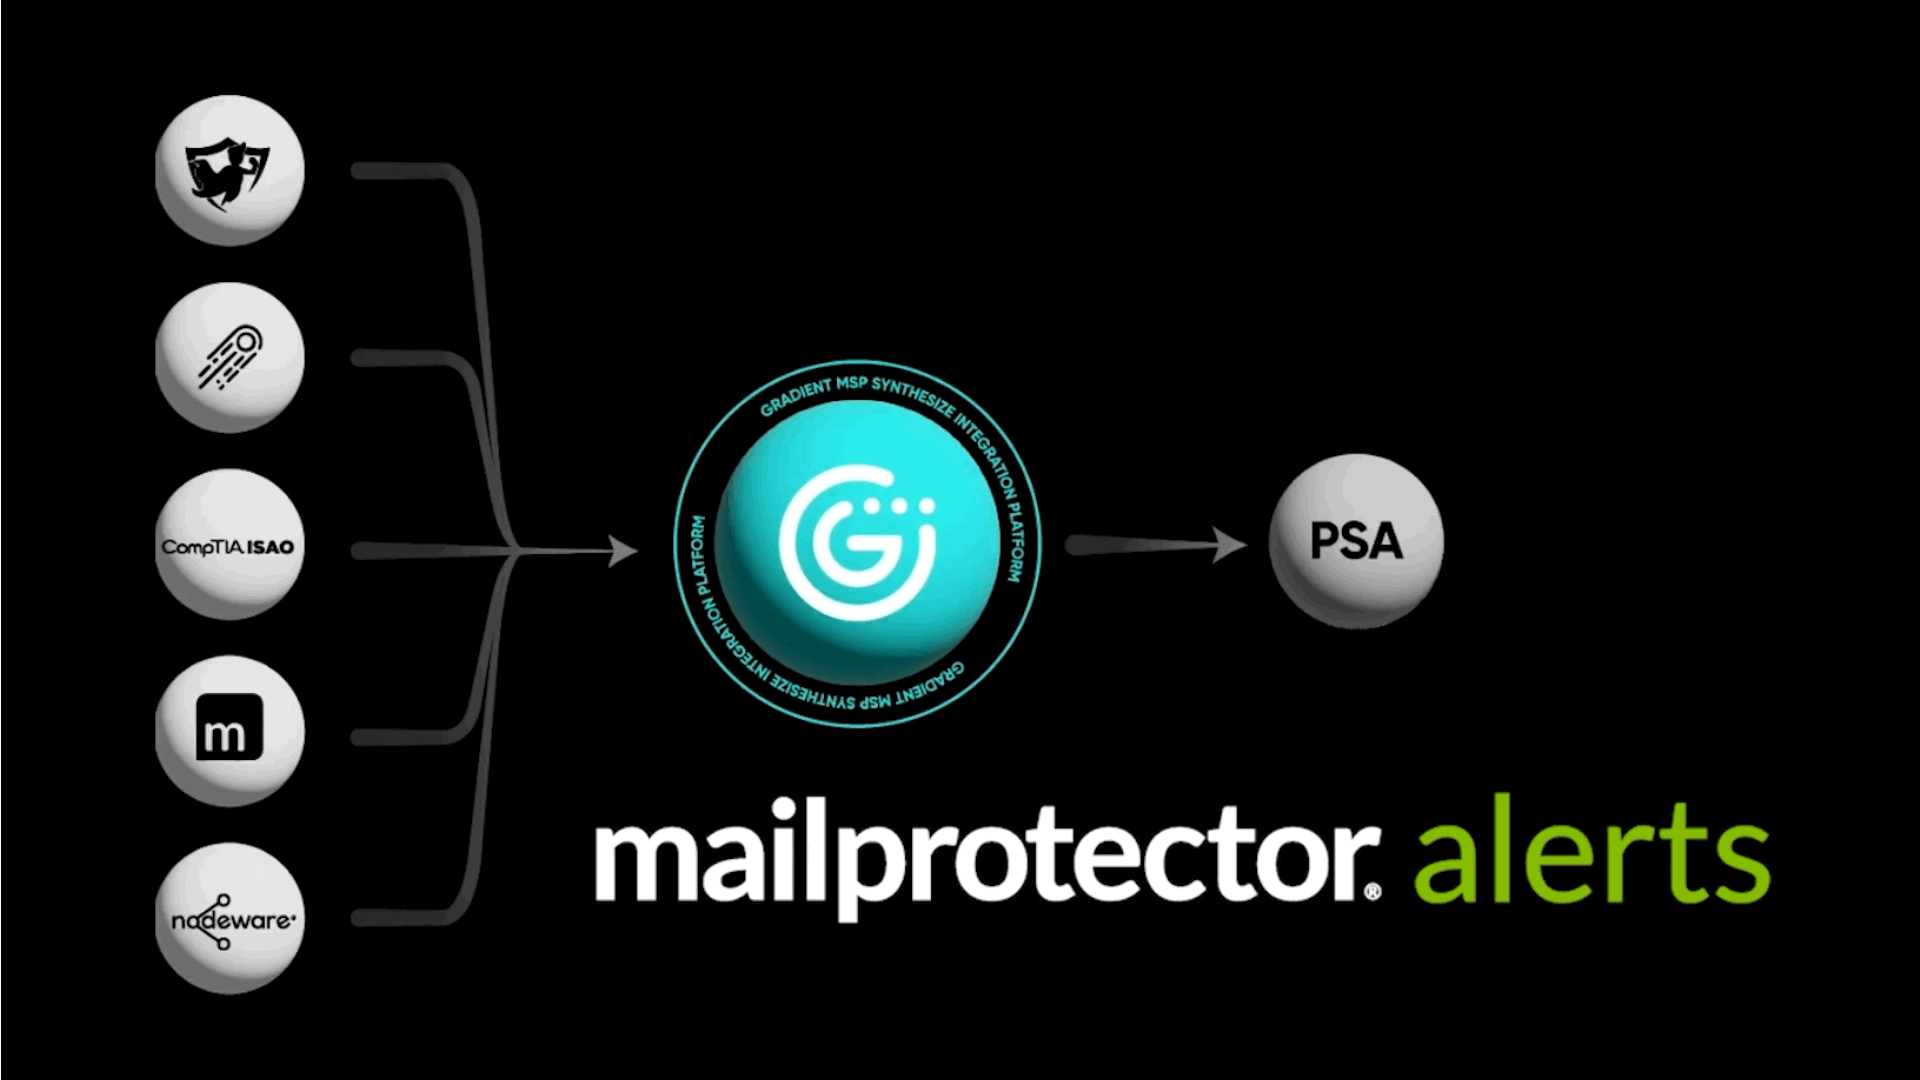 Mailprotector Email Security Alerts in Gradient MSP